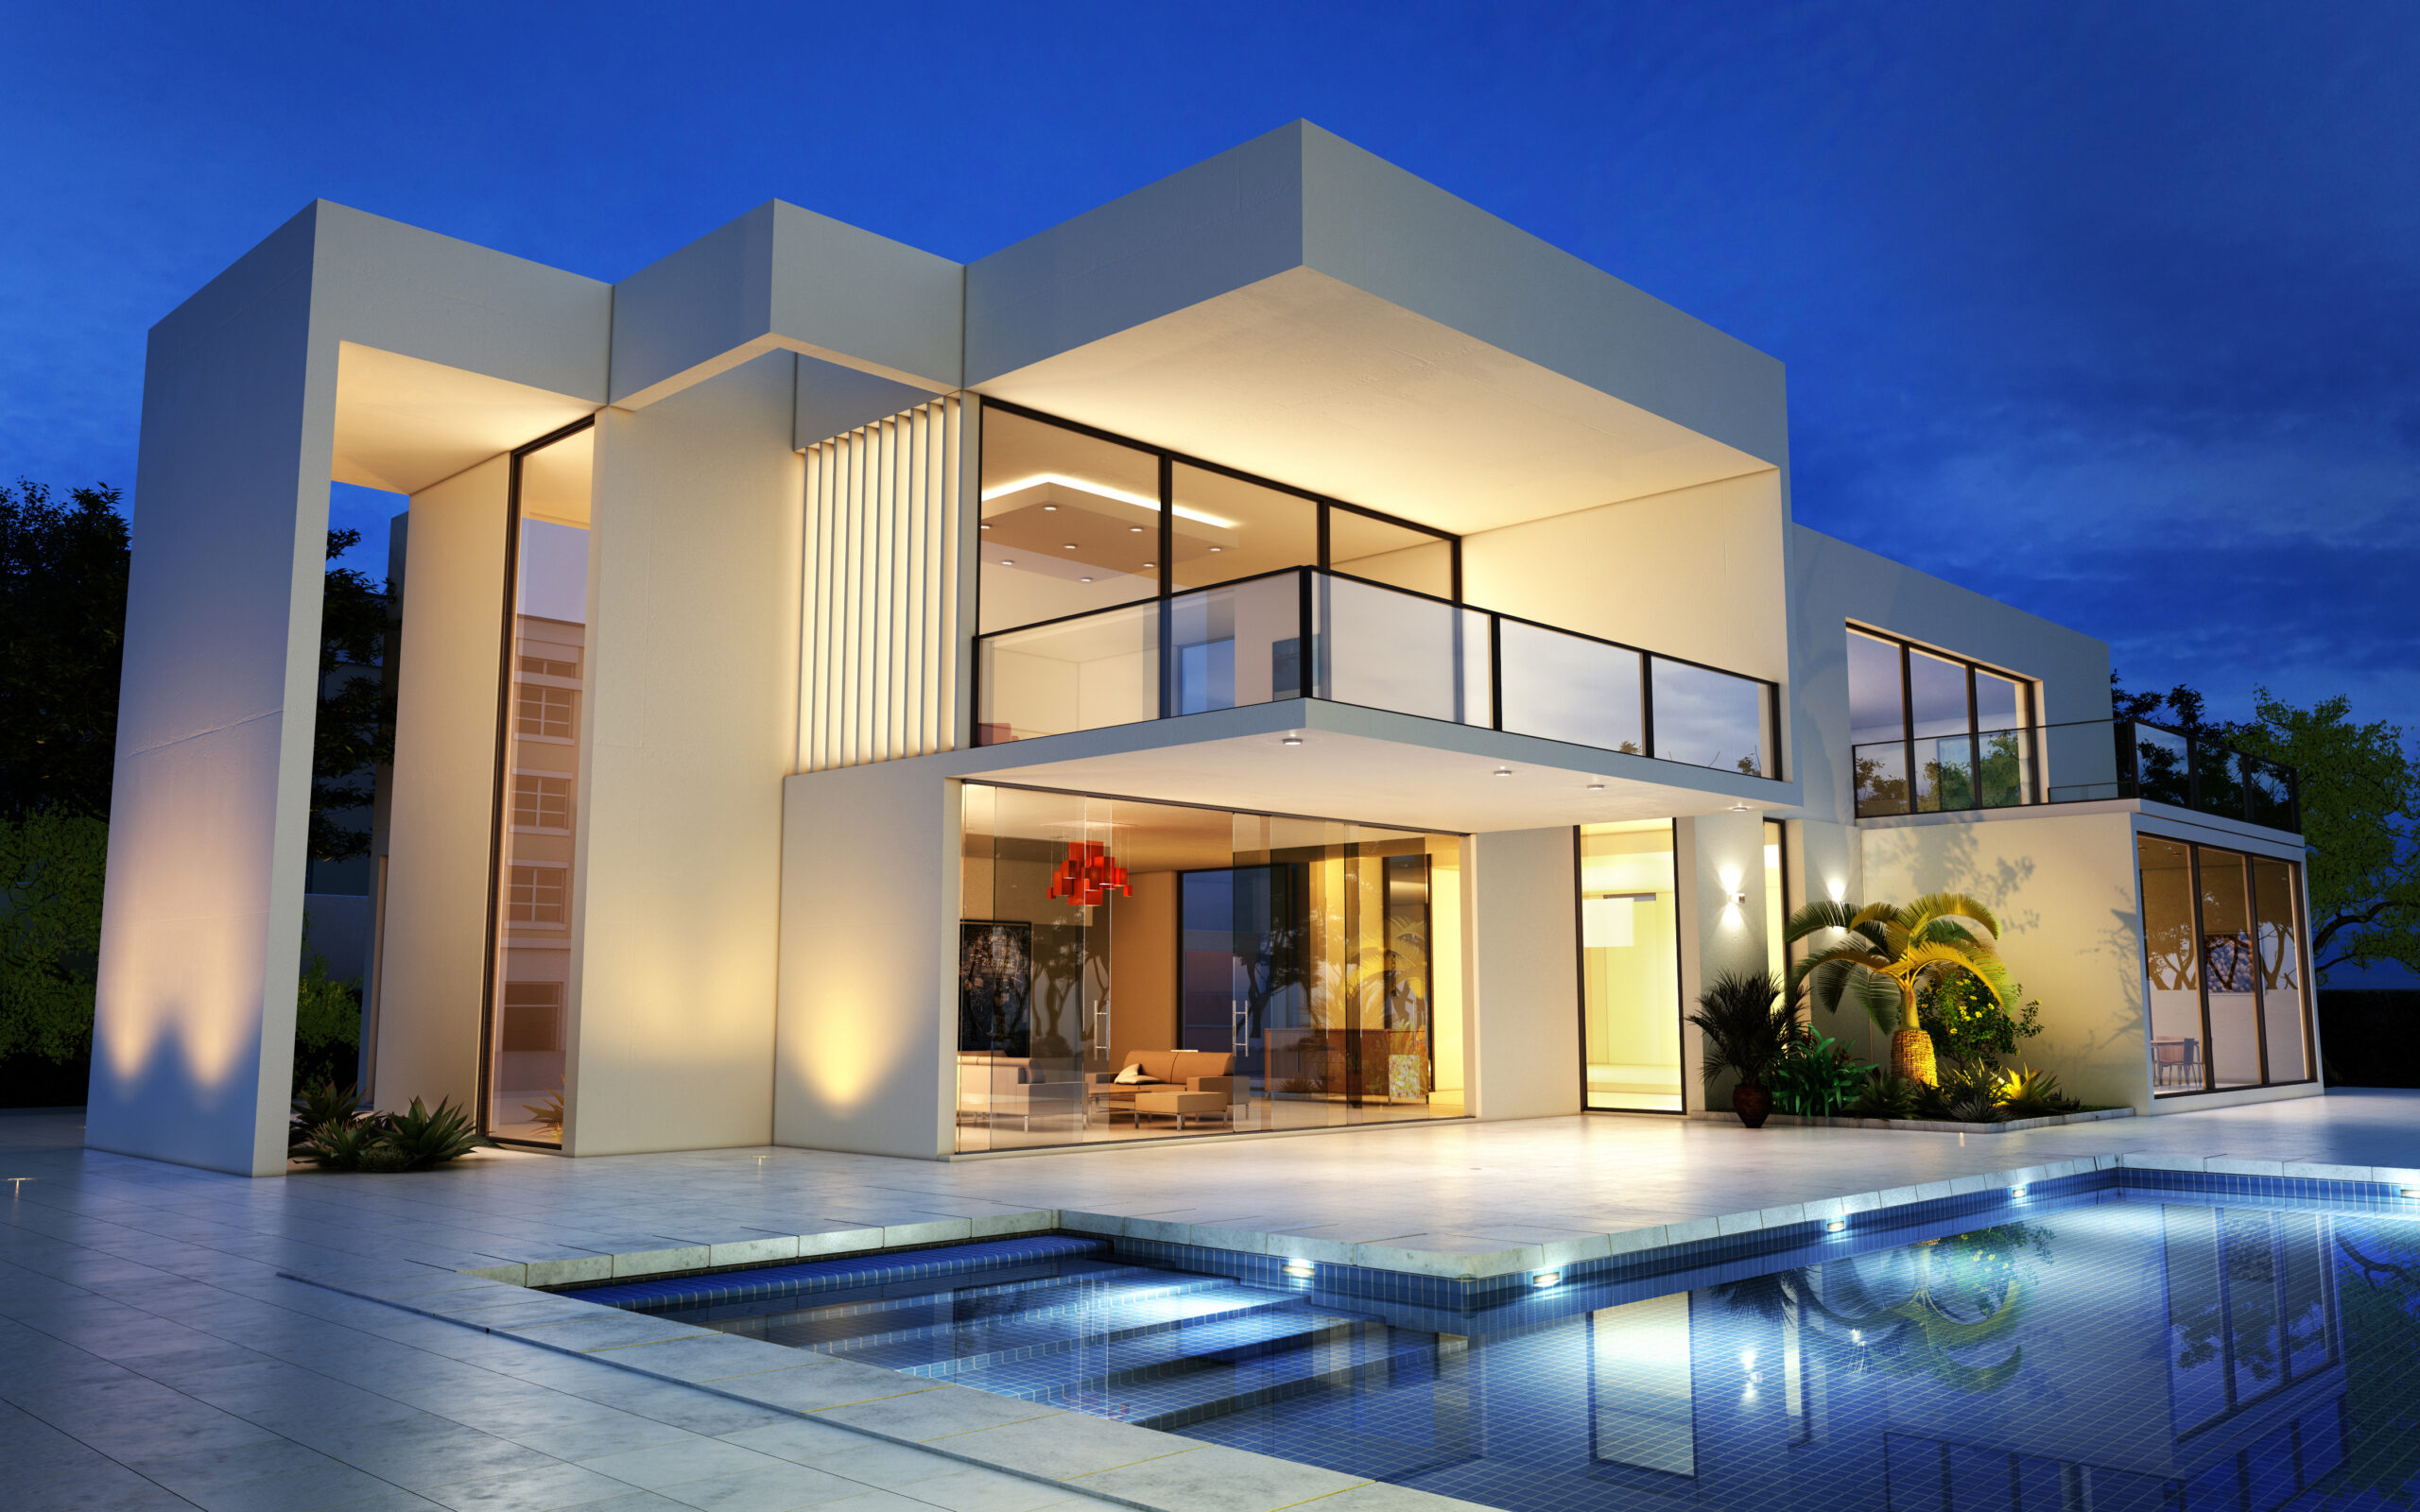 Things to consider when buying a luxury home. - Property Insights